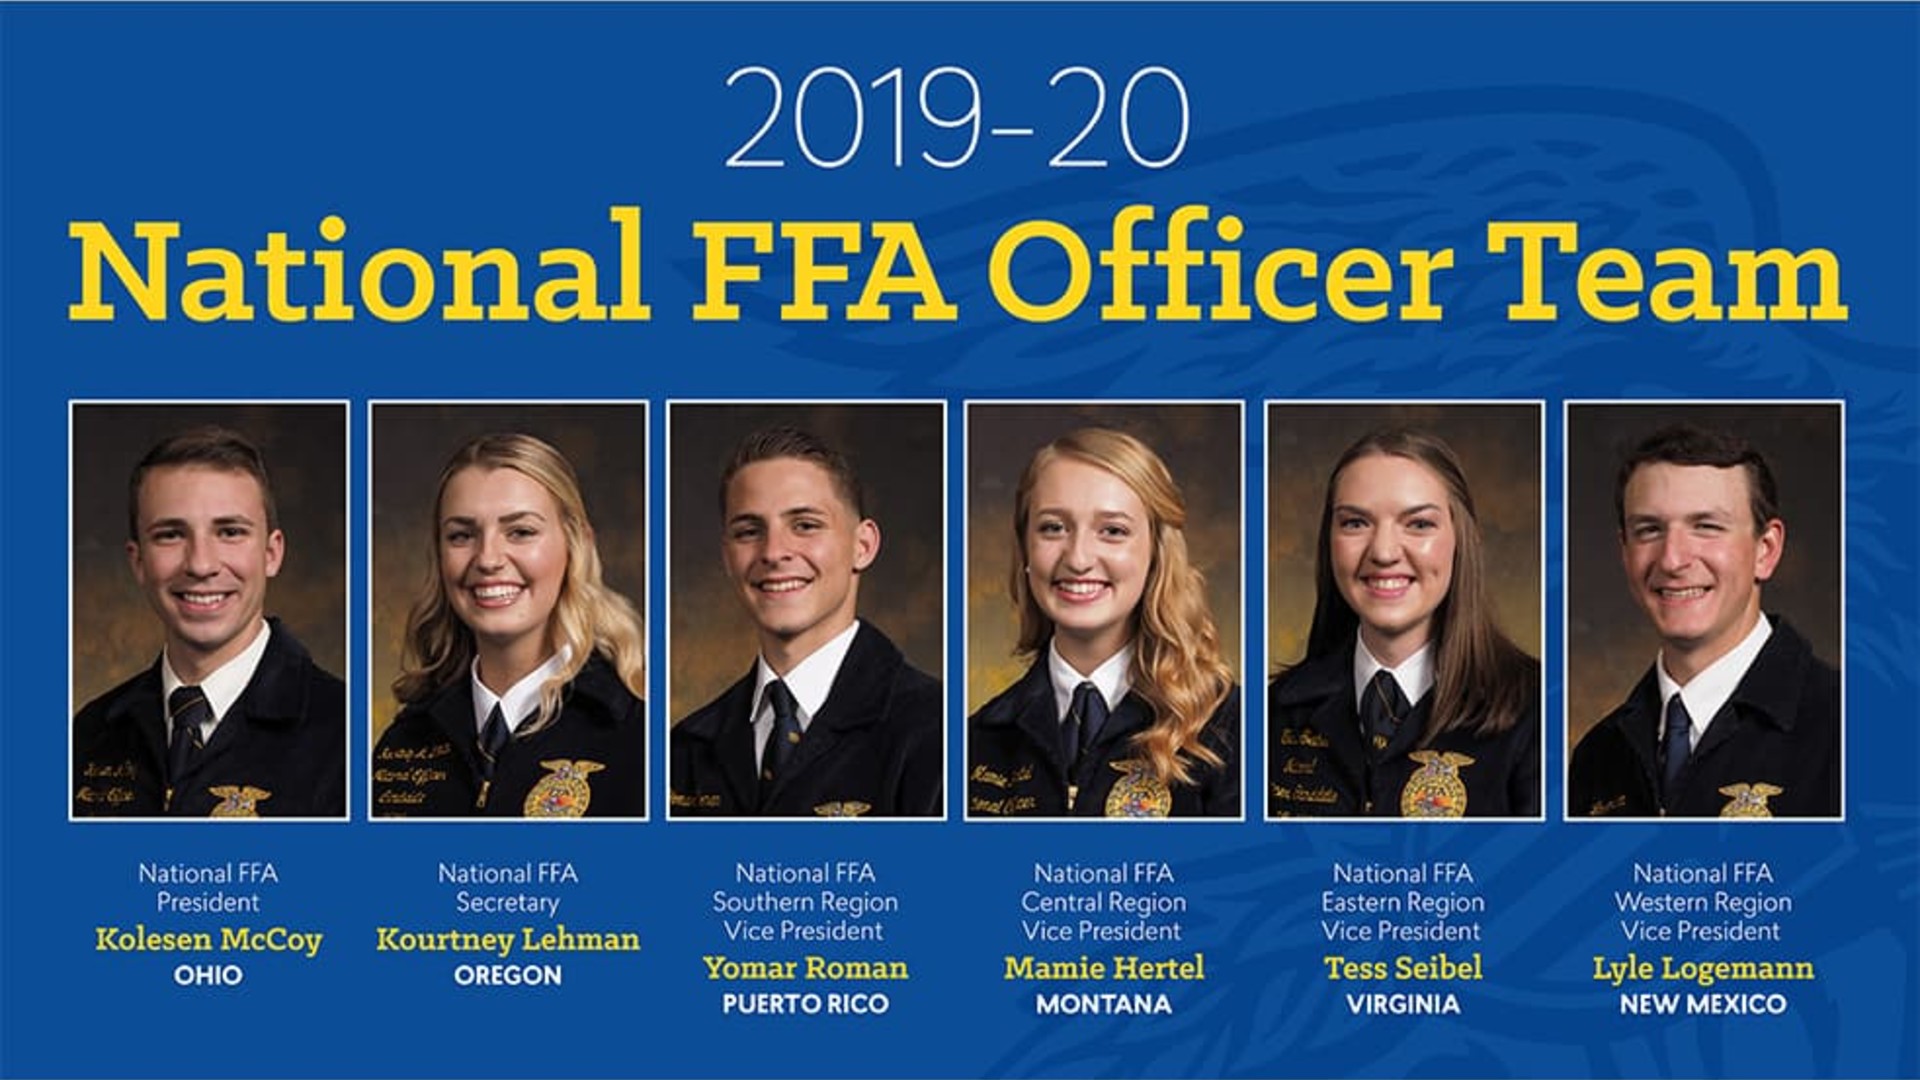 National Ffa Convention 2022 Schedule 2019-20 National Ffa Officer Team Elected At The 92Nd National Ffa  Convention & Expo - Ag Information Network Of The West